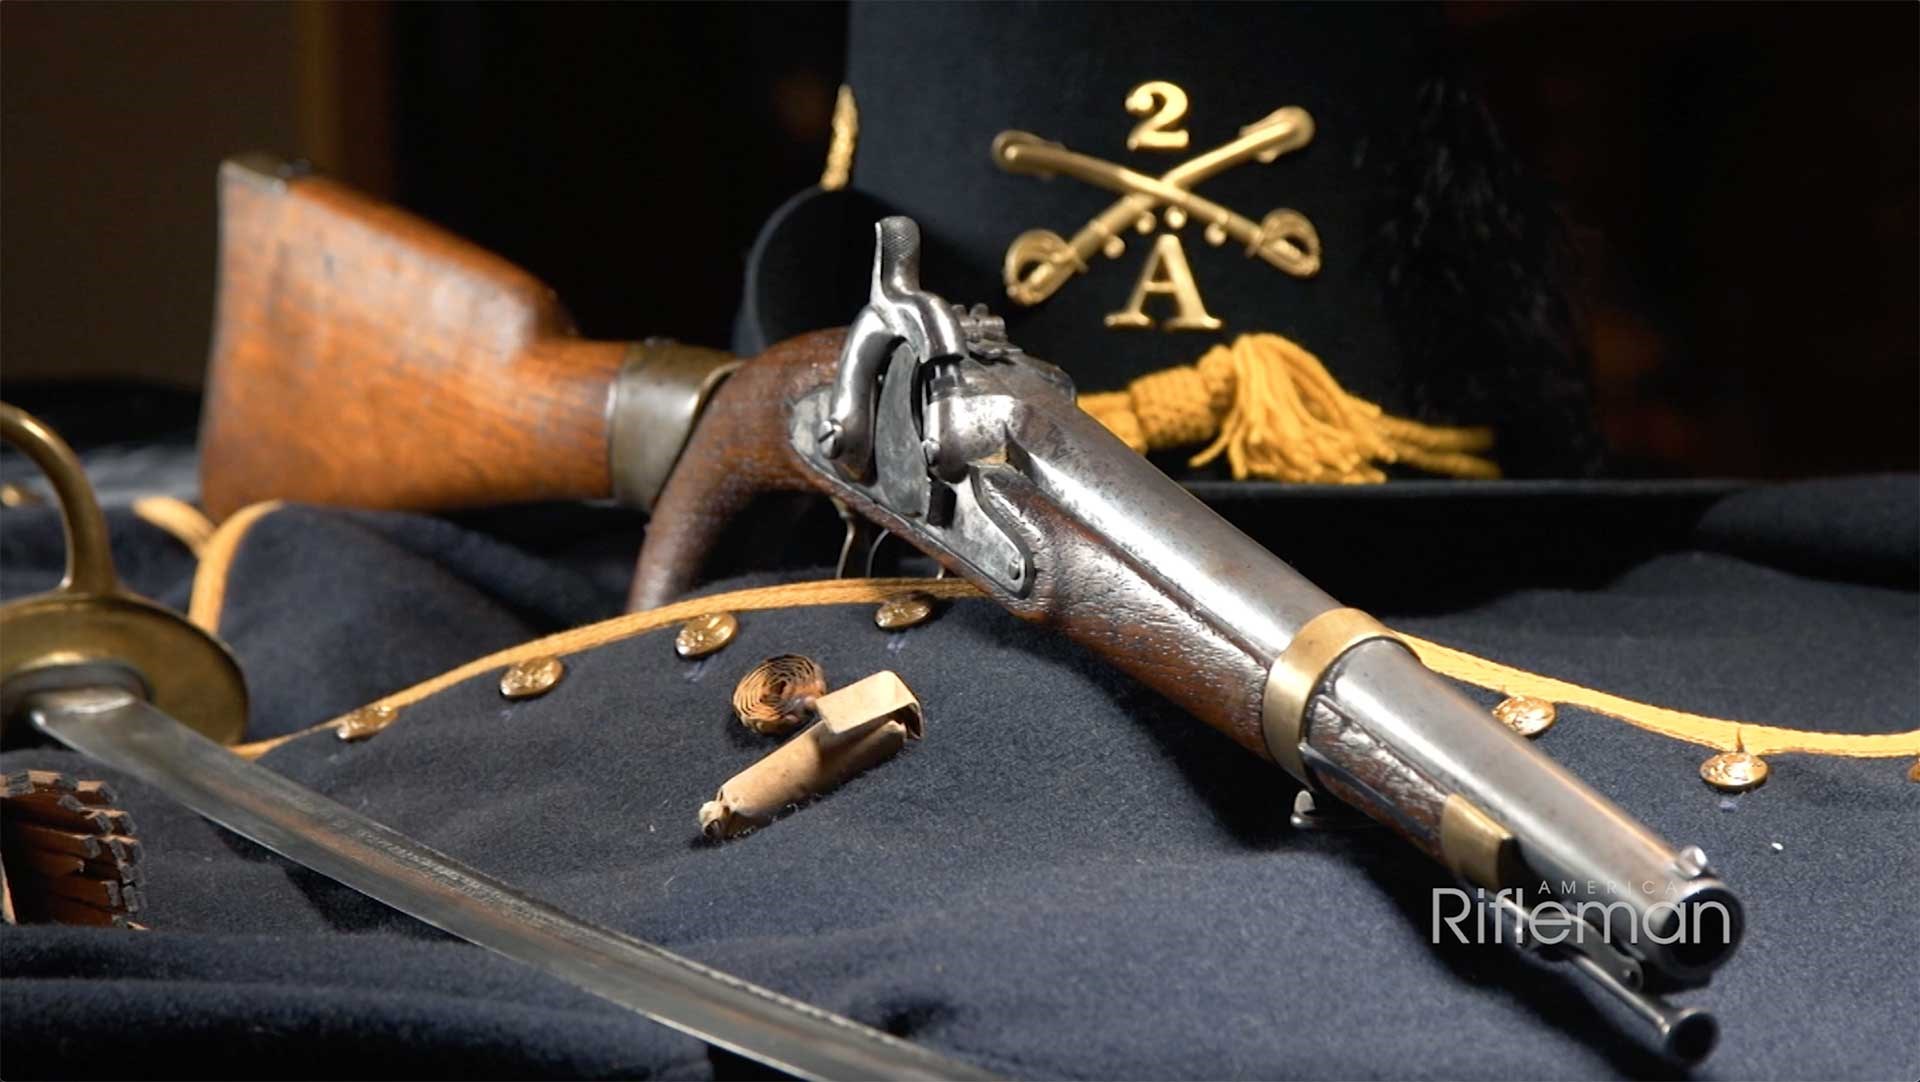 Model 1855 pistol carbine laying on a cavalryman's blue jacket next to a paper cartridge and a roll of Maynard tape primers.